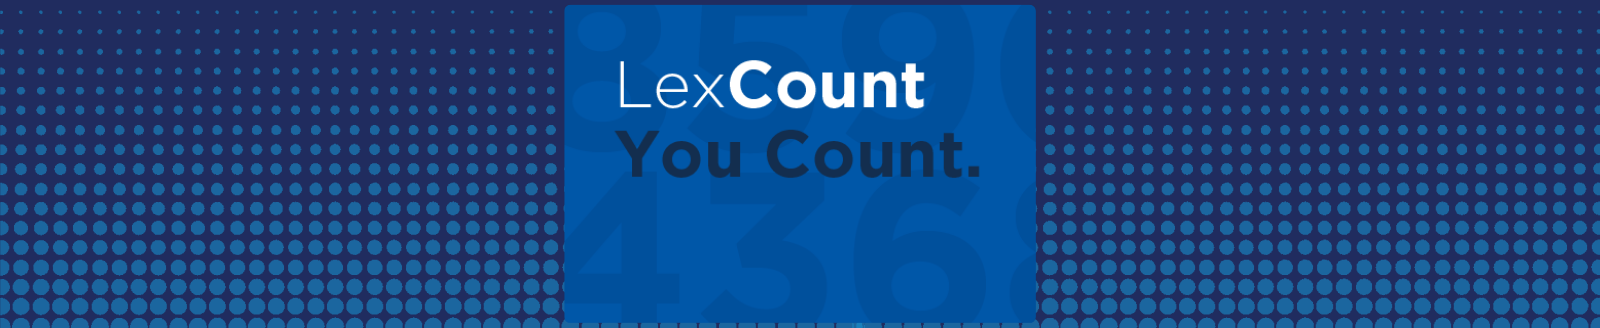 LexCount You Count.